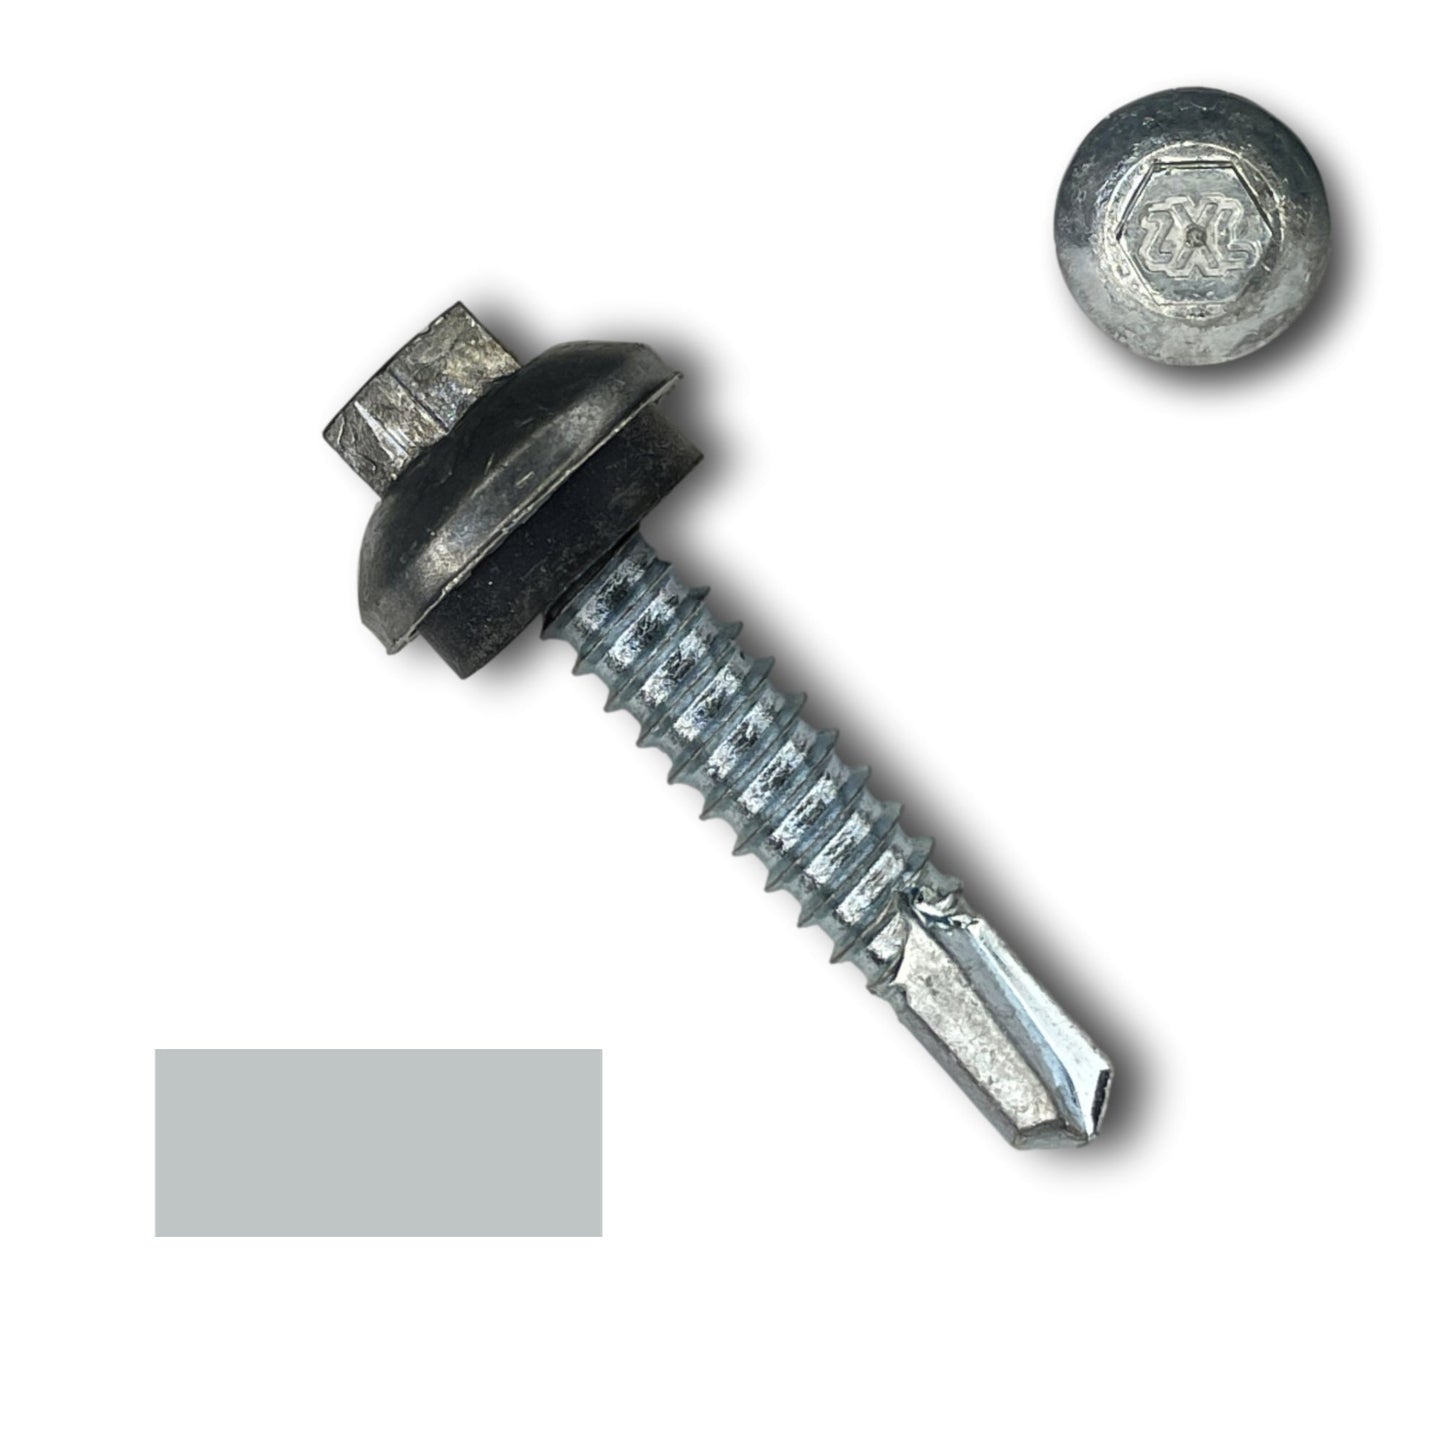 A Perma Cover #14 x 1.25" ZXL Dome Cap Metal Building Screw (Metal-to-Metal), Self-Drilling - 250, 500, or 1000 Pack is displayed against a white background. The details of the self-drilling screw head are shown in a separate close-up view above it.